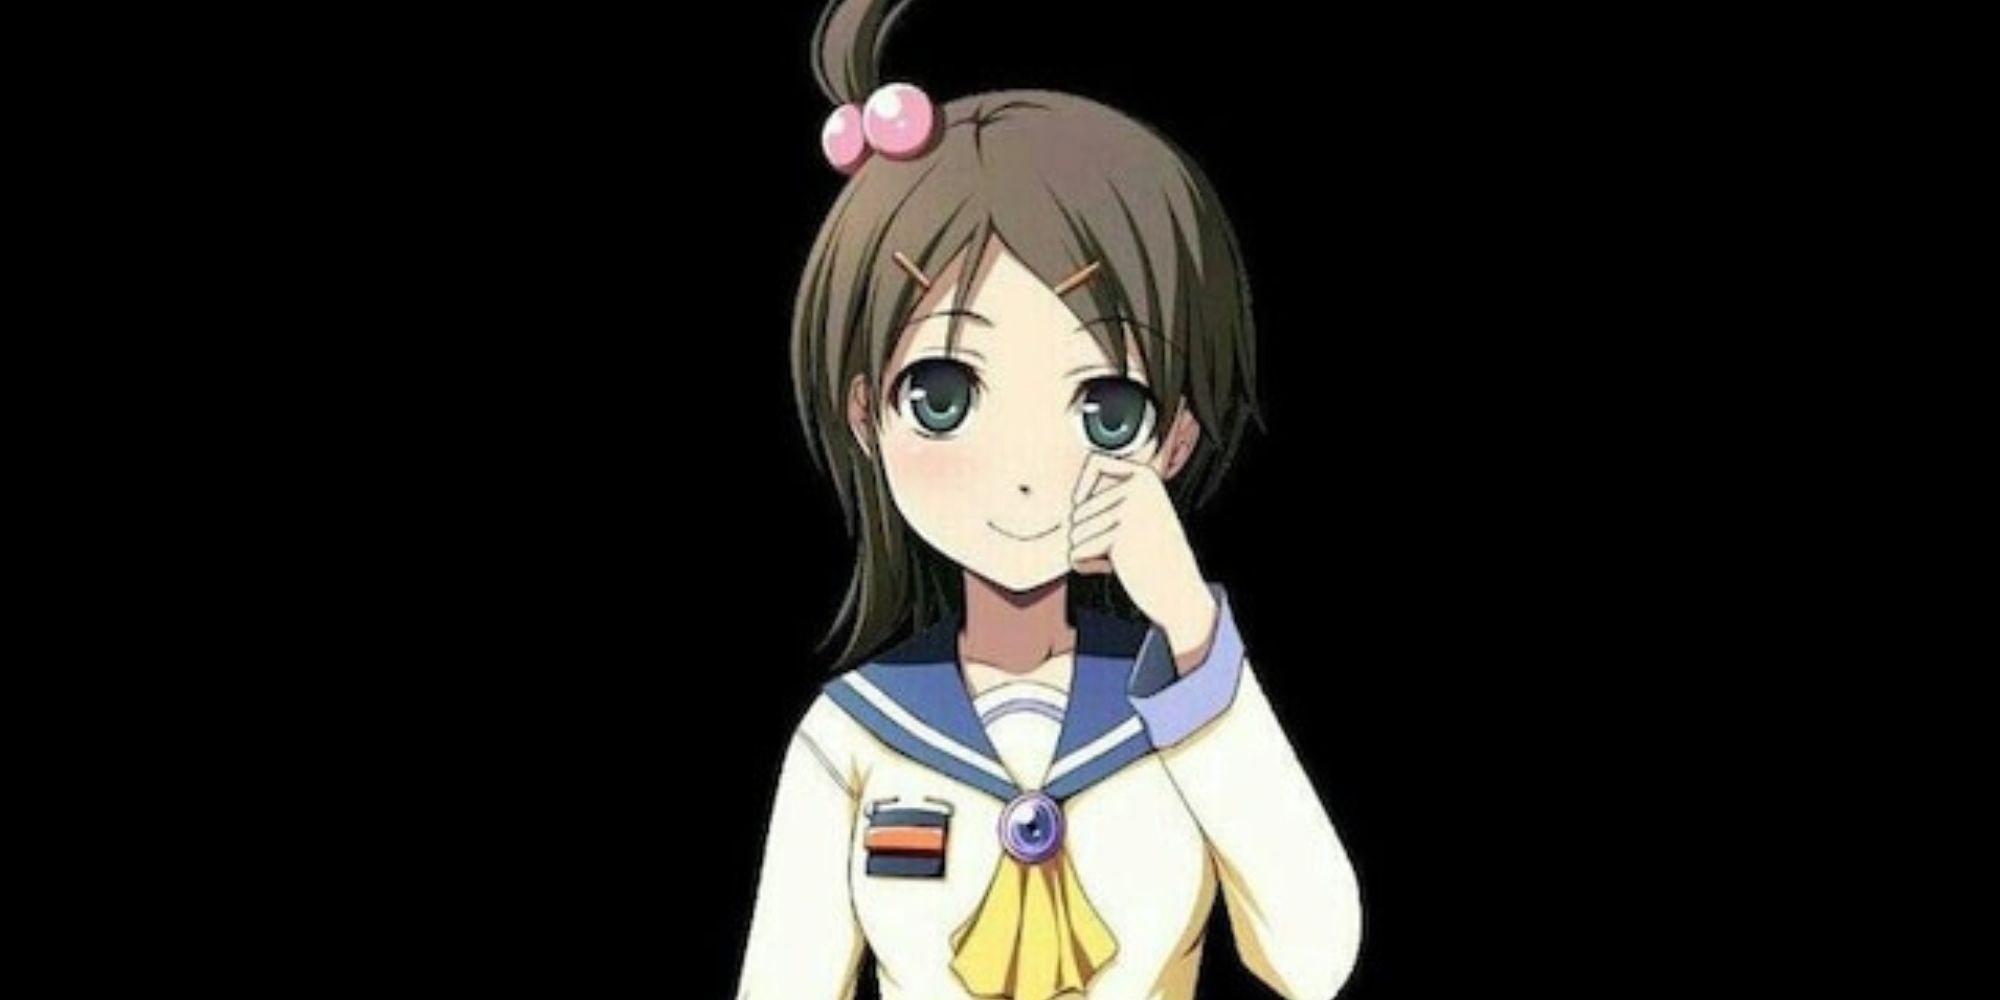 Mayu in Corpse Party